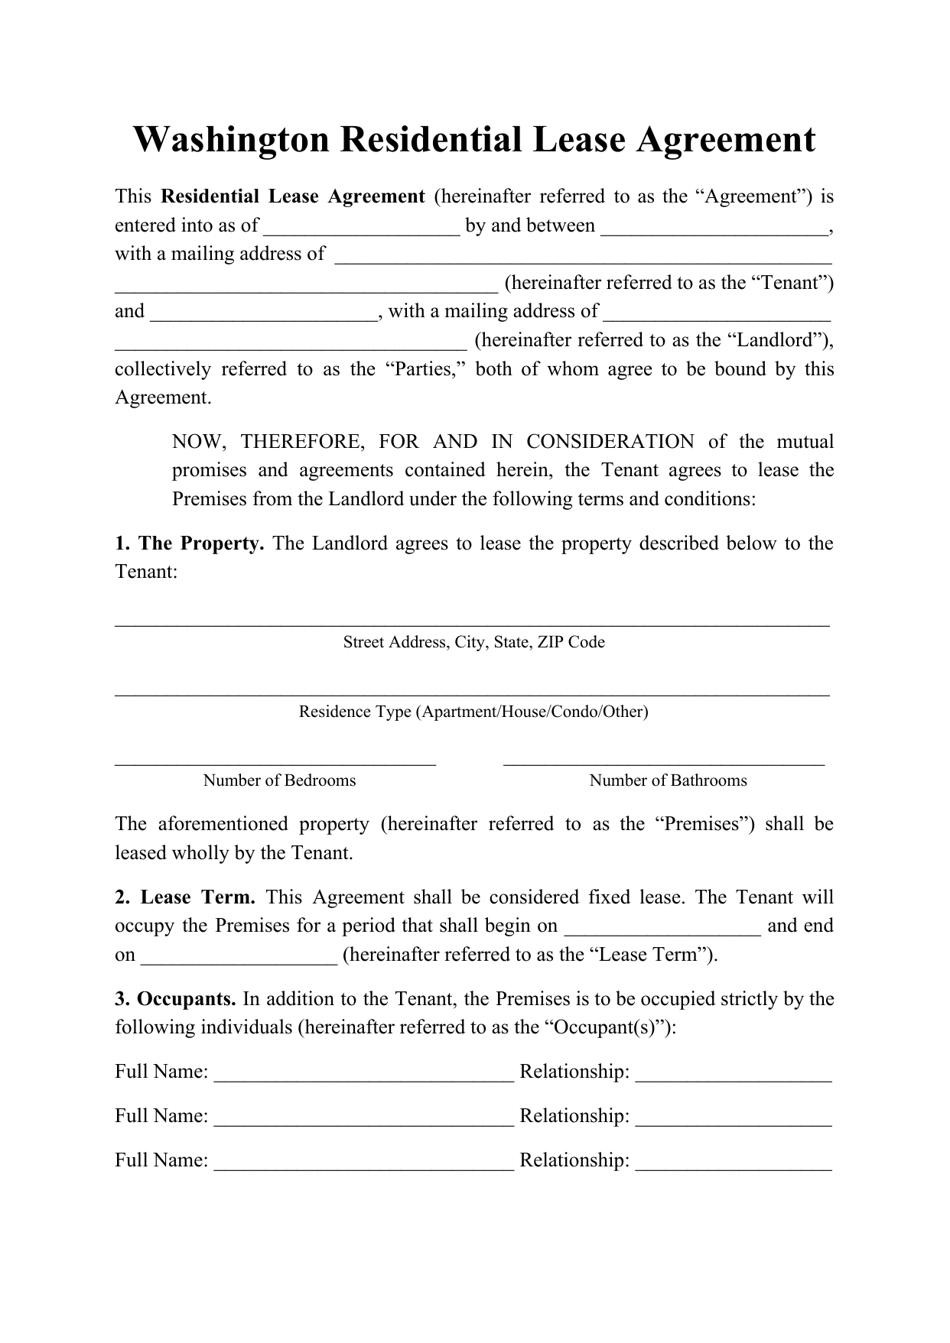 Washington Residential Lease Agreement Template Fill Out, Sign Online